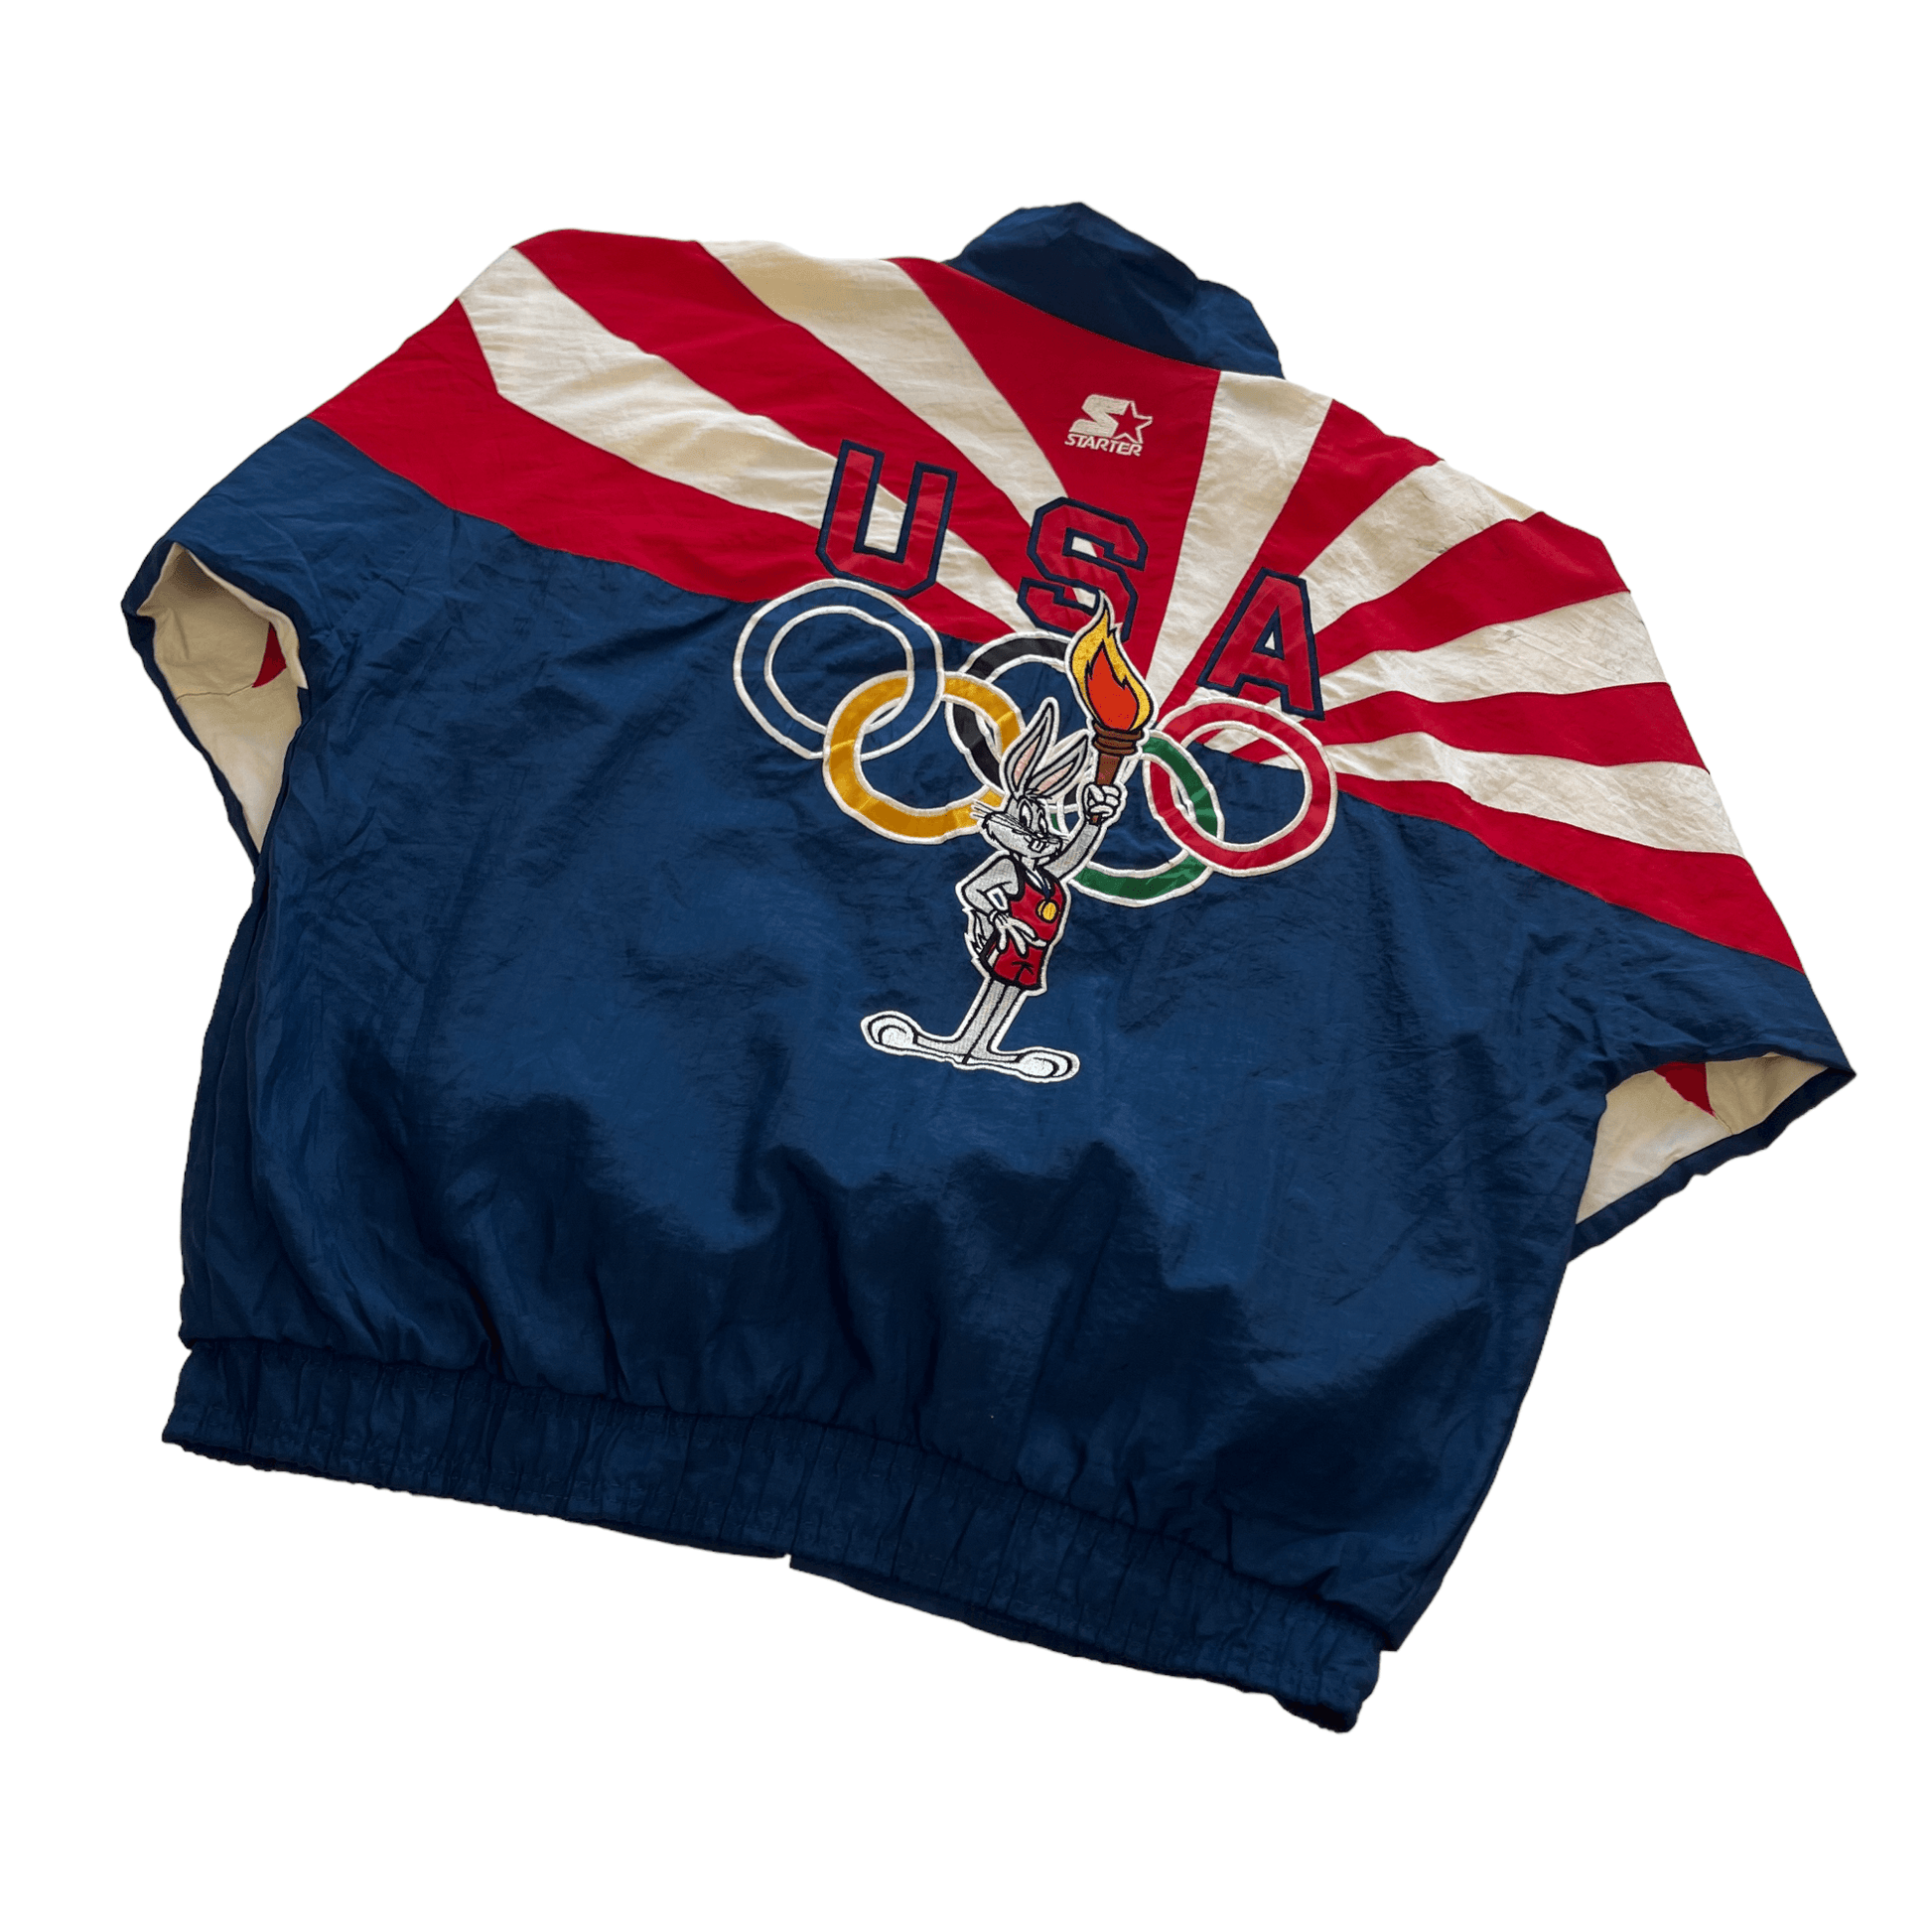 Vintage 90s Red, Navy Blue + White Starter x Looney Tunes USA Jacket - Extra Large - The Streetwear Studio